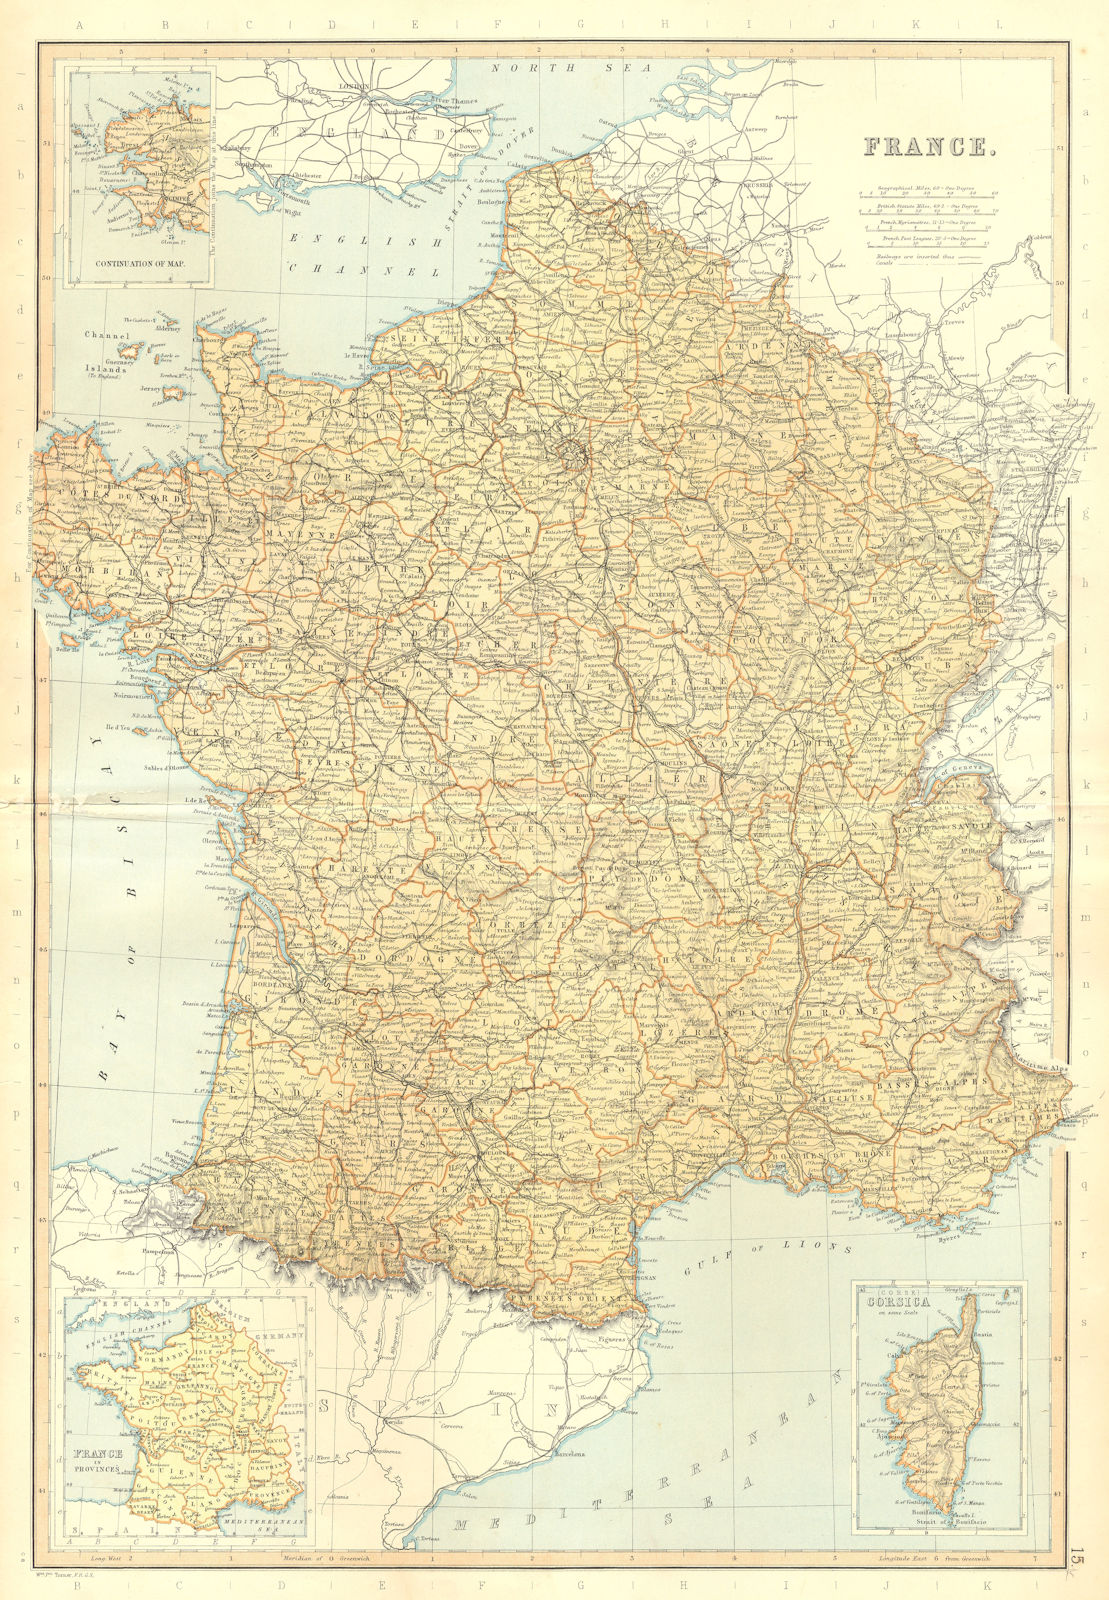 Associate Product FRANCE. railways canals departments. Inset, in provinces. BLACKIE 1893 old map